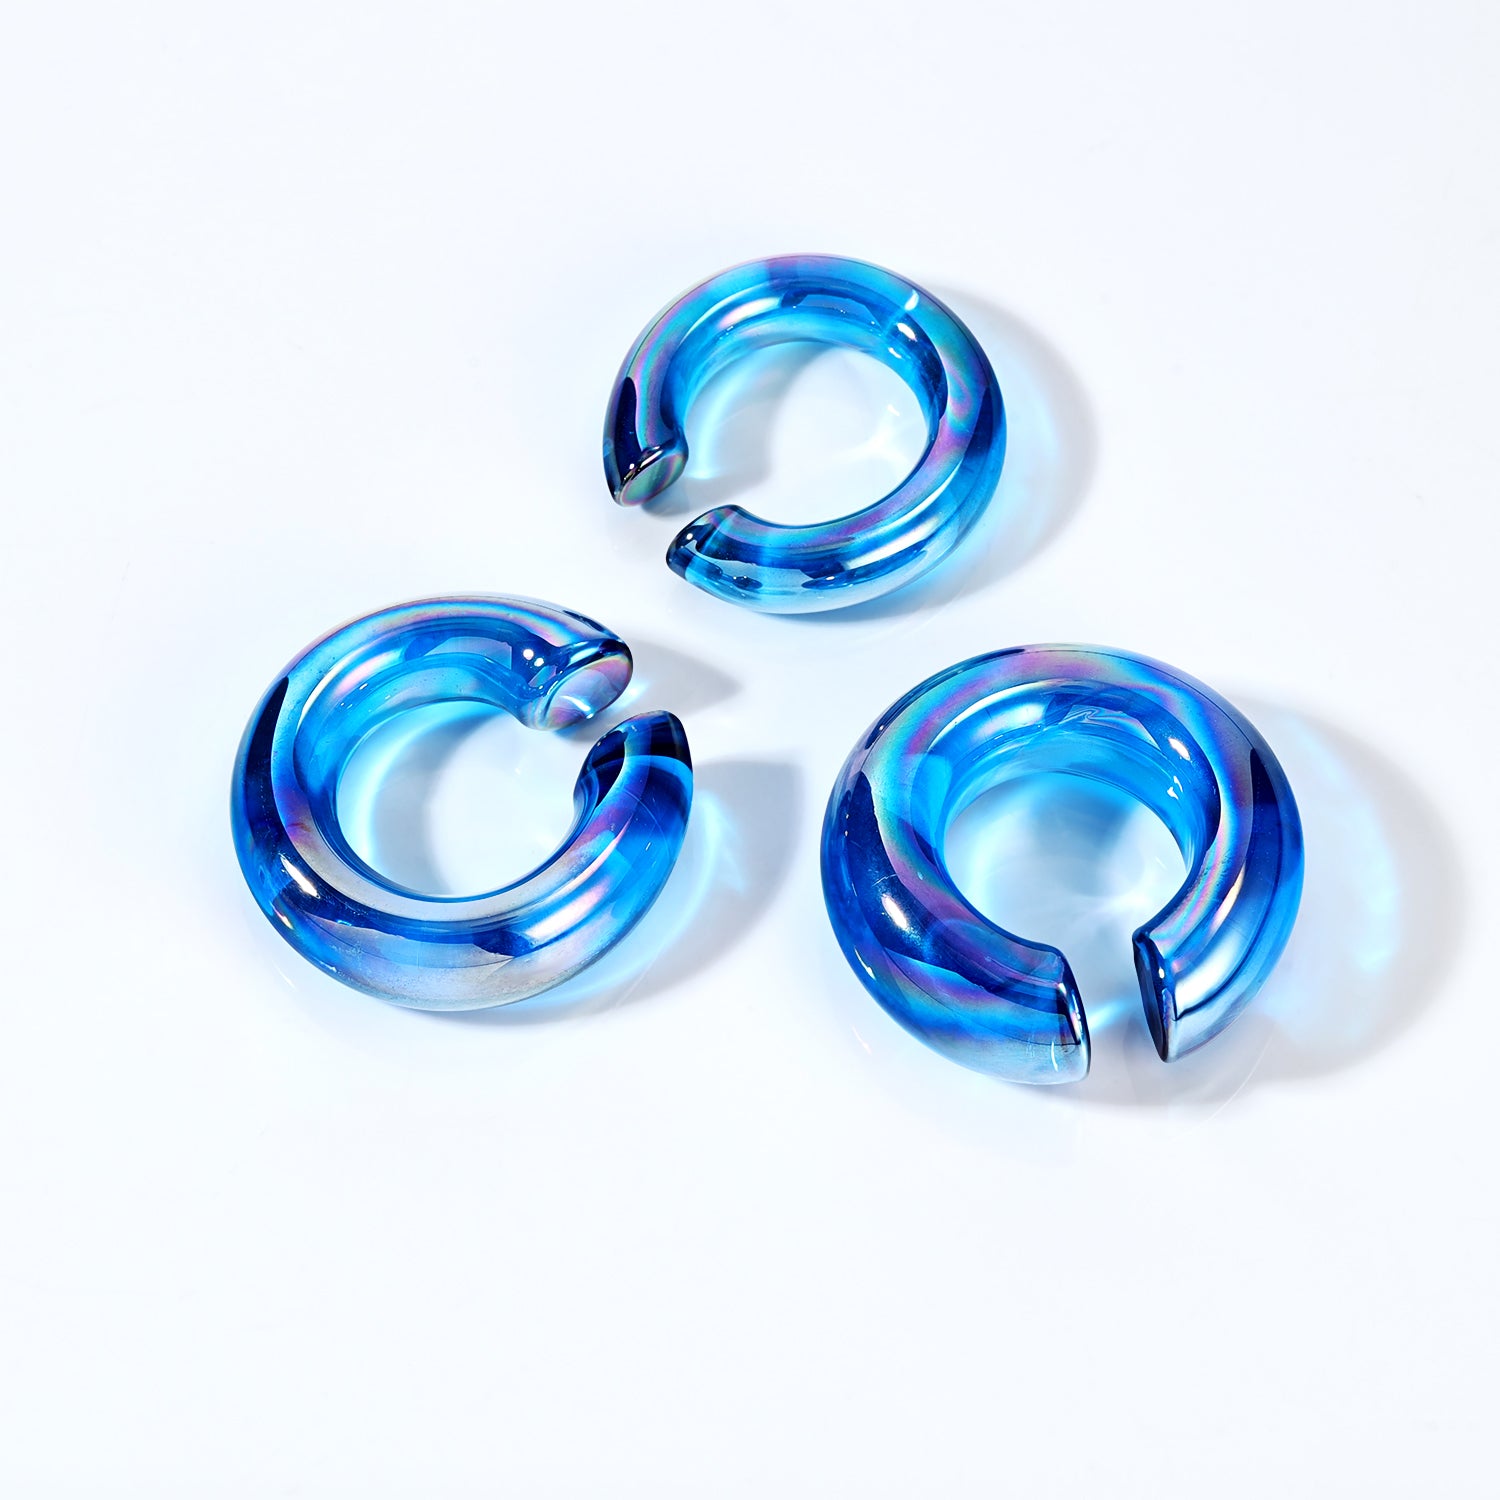 1 Pair C Shaped Ear Plugs Tunnel Blue Glass Stretching Earring Ear Gauge Expanders